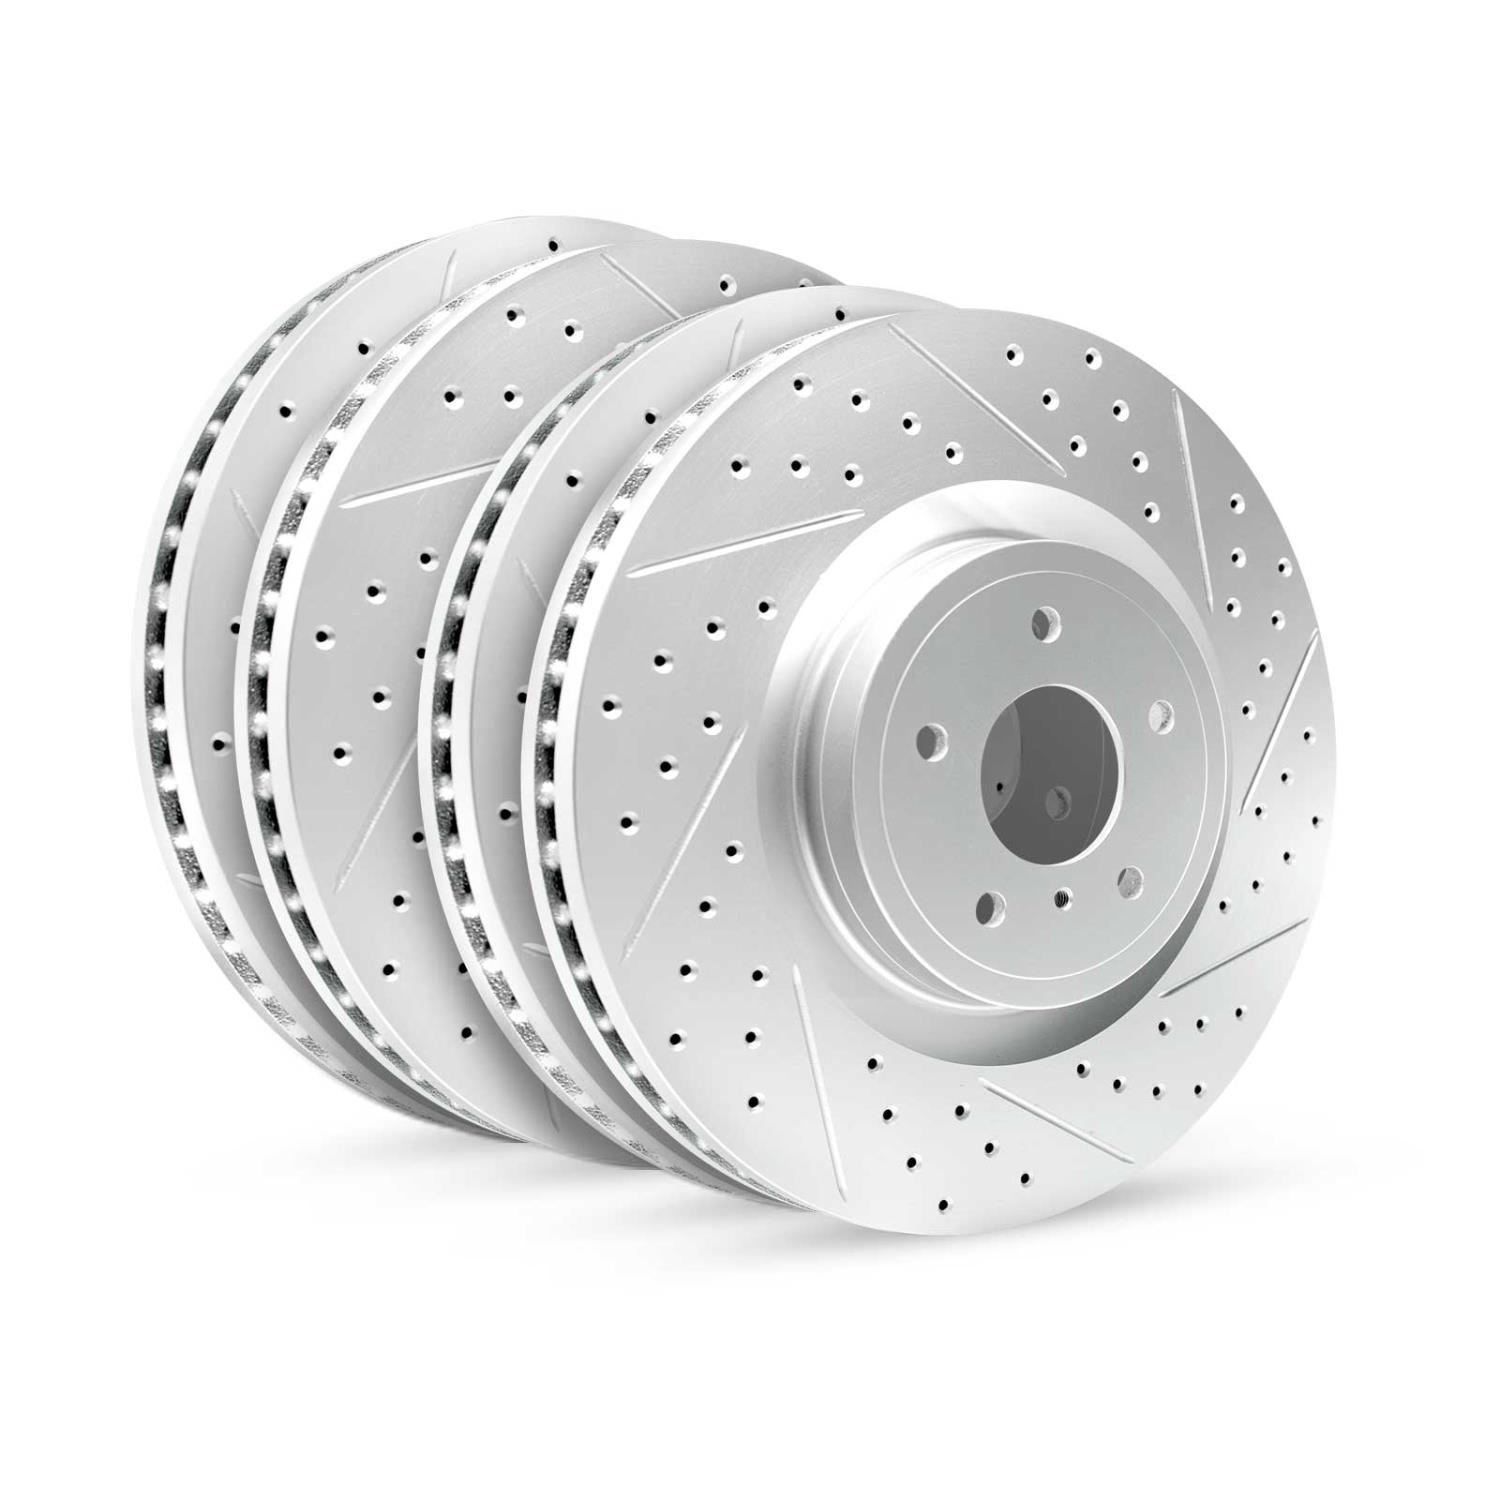 GEO-Carbon Drilled/Slotted Rotors, 2006-2018 Lexus/Toyota/Scion, Position: Front/Rear